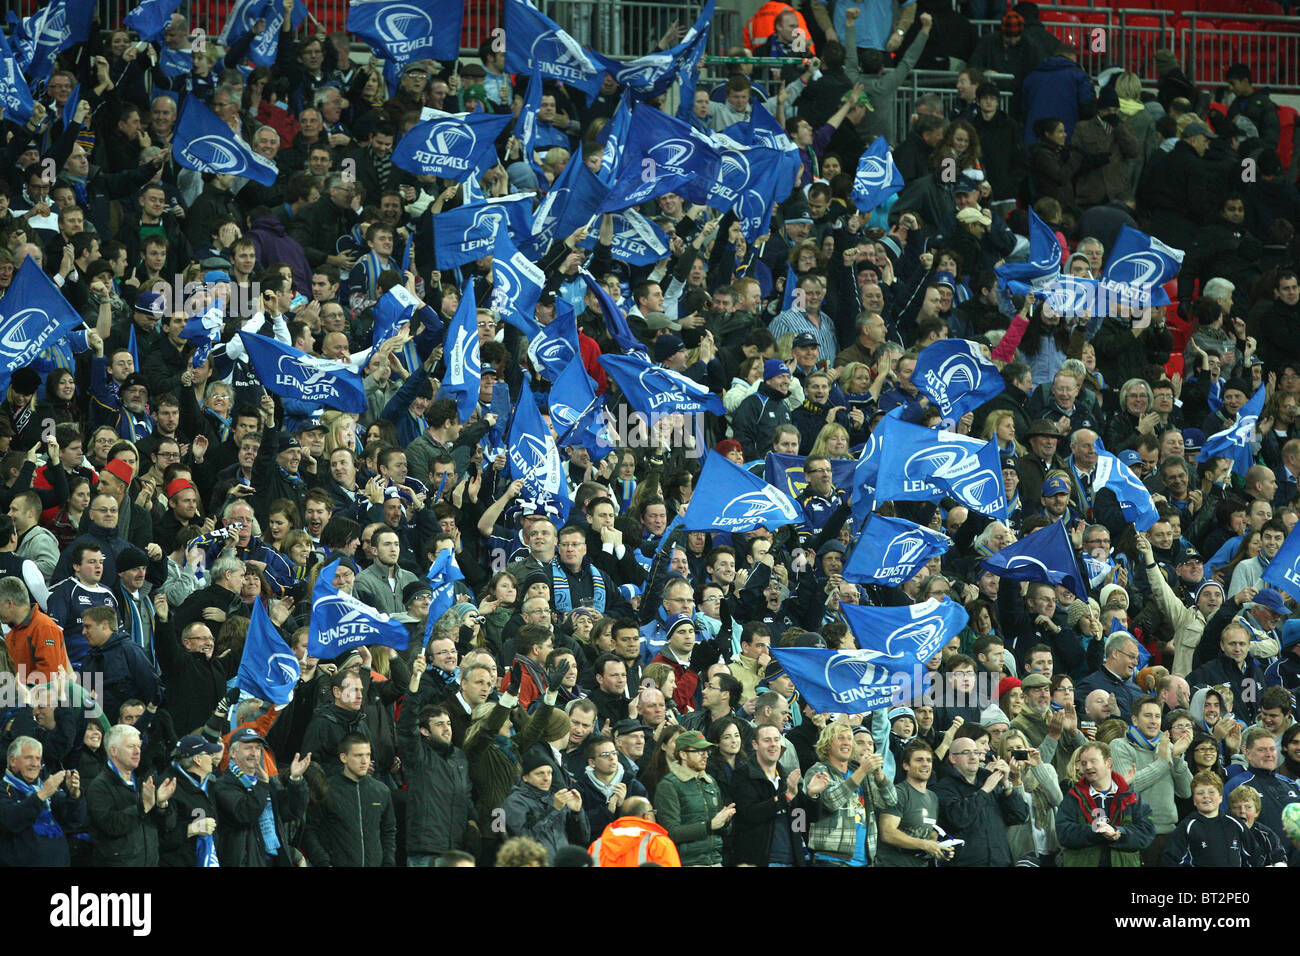 Leinster supporters celebrate the victory during the Heineken Cup Rugby match Saracens v Leinster at Wembley Stadium in London. Stock Photo